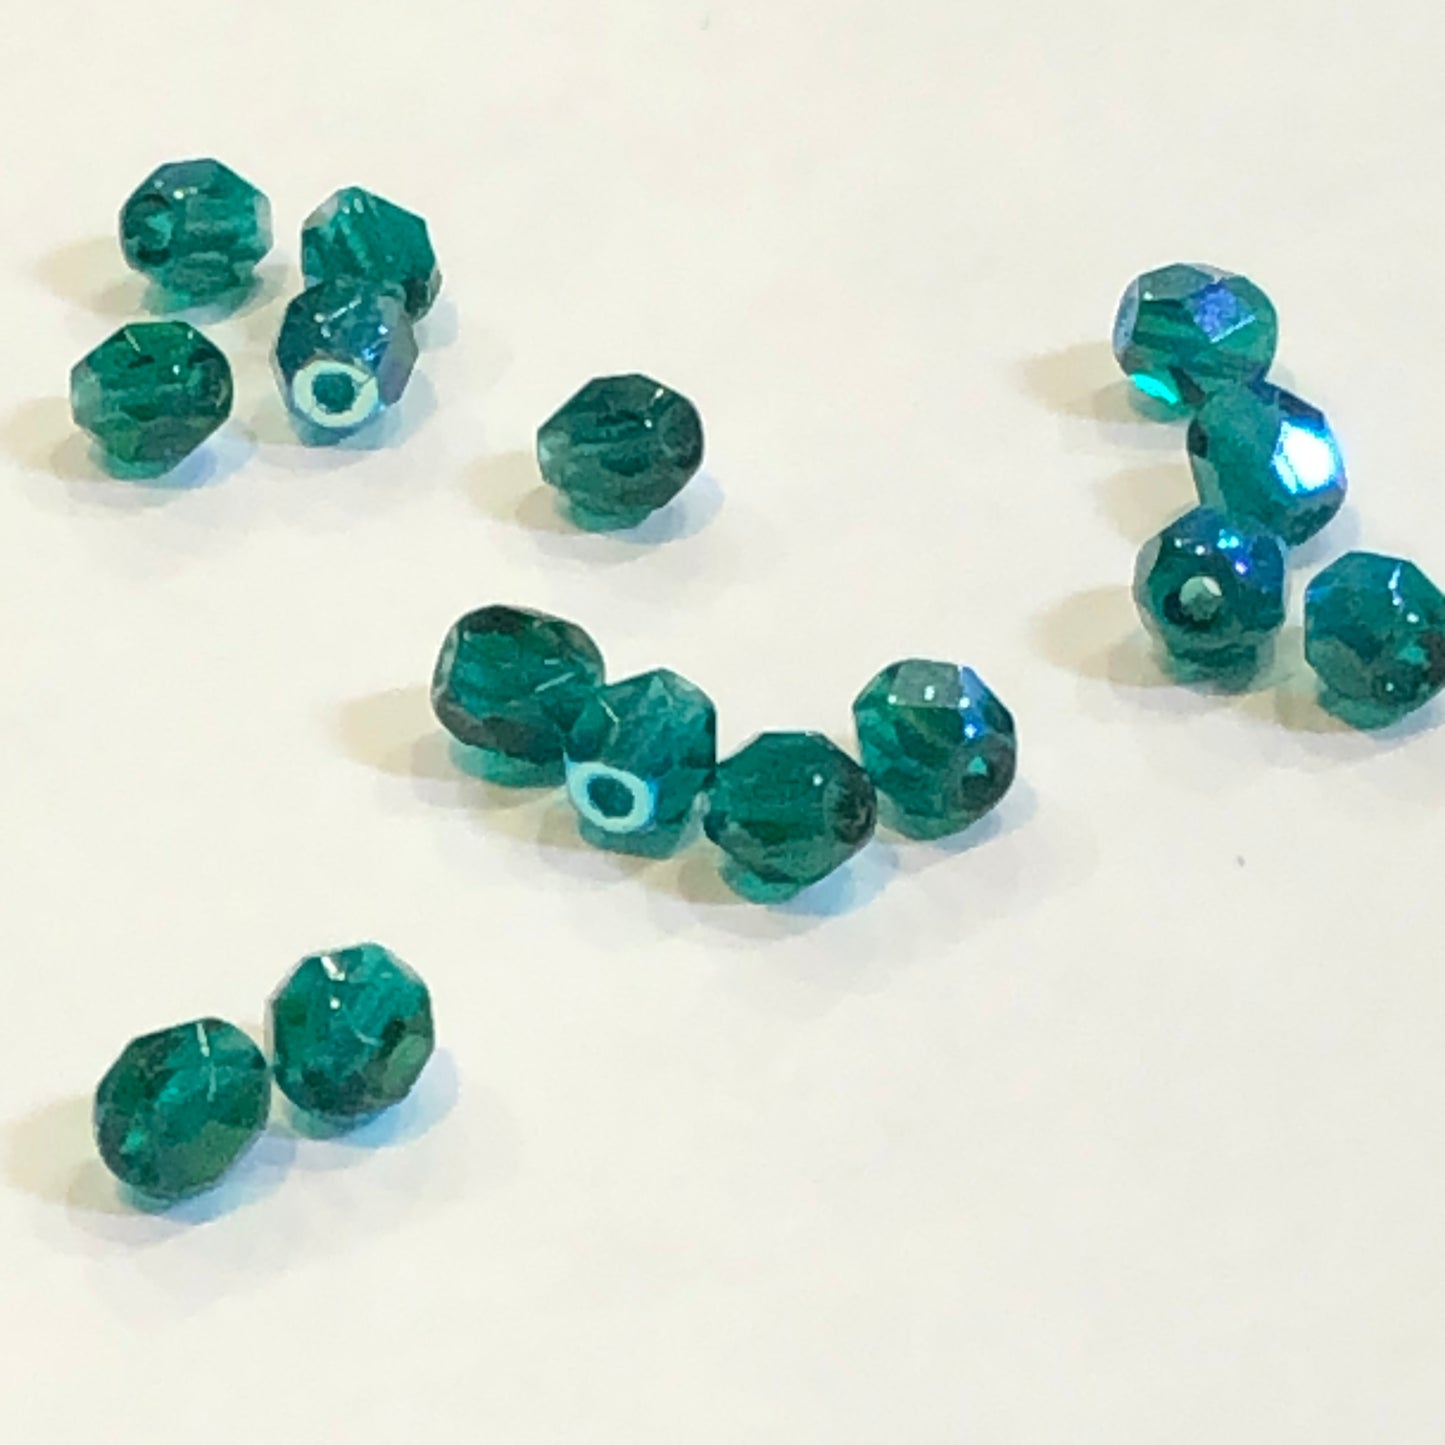 Czech Fire Polished Emerald AB Faceted Round Glass Beads, 4 mm - 15 or 22 Beads